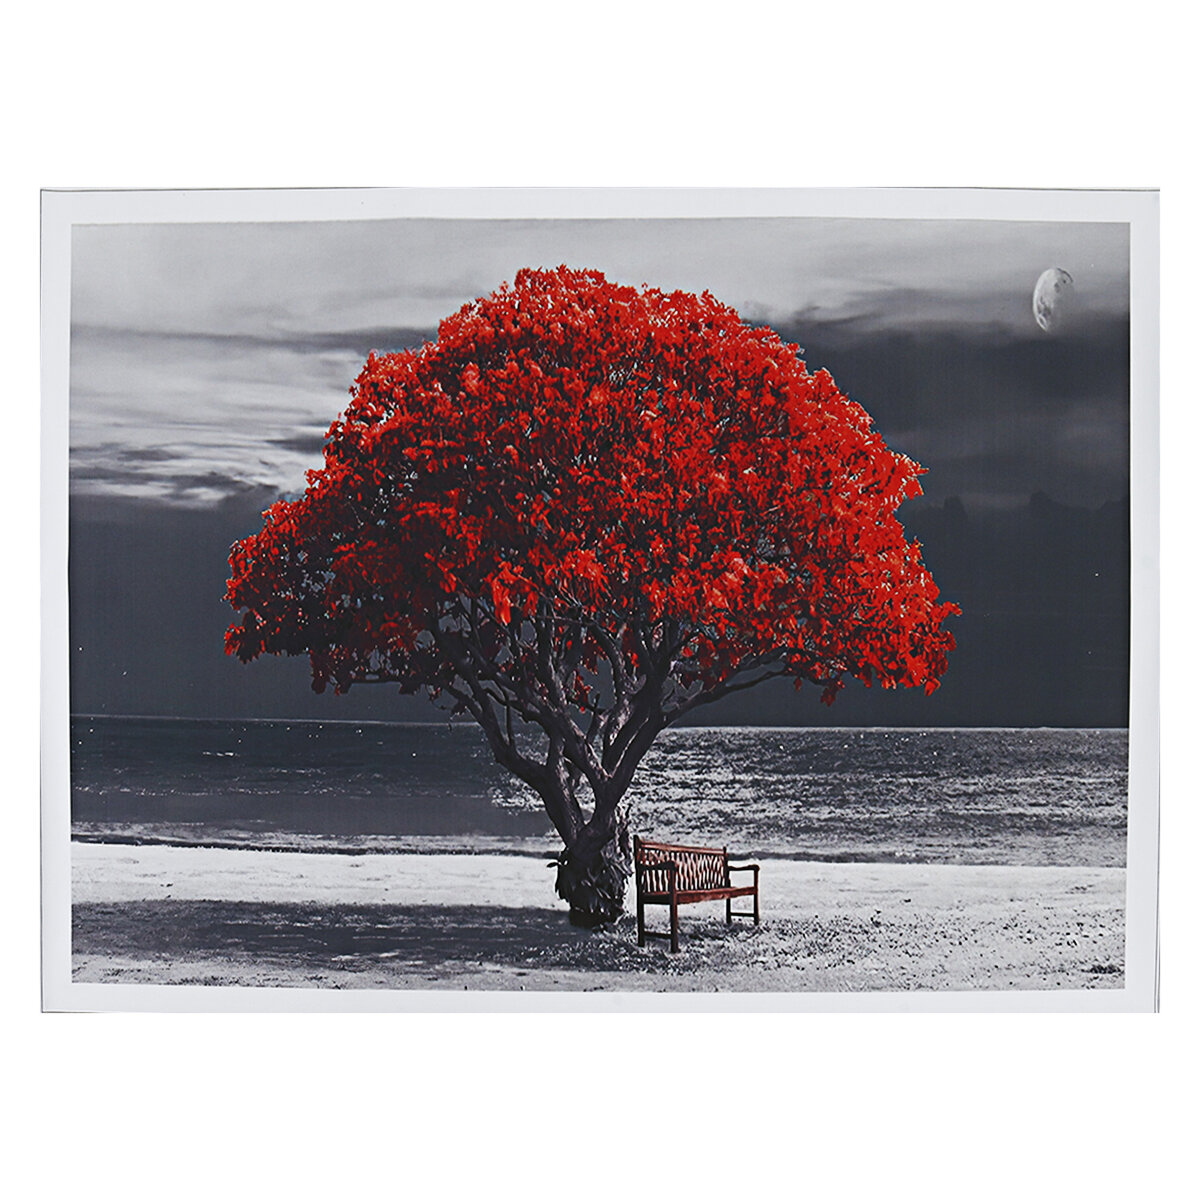 1 Piece Big Tree Canvas Painting Wall Decorative Print Art Picture Unframed Wall Hanging Home Office